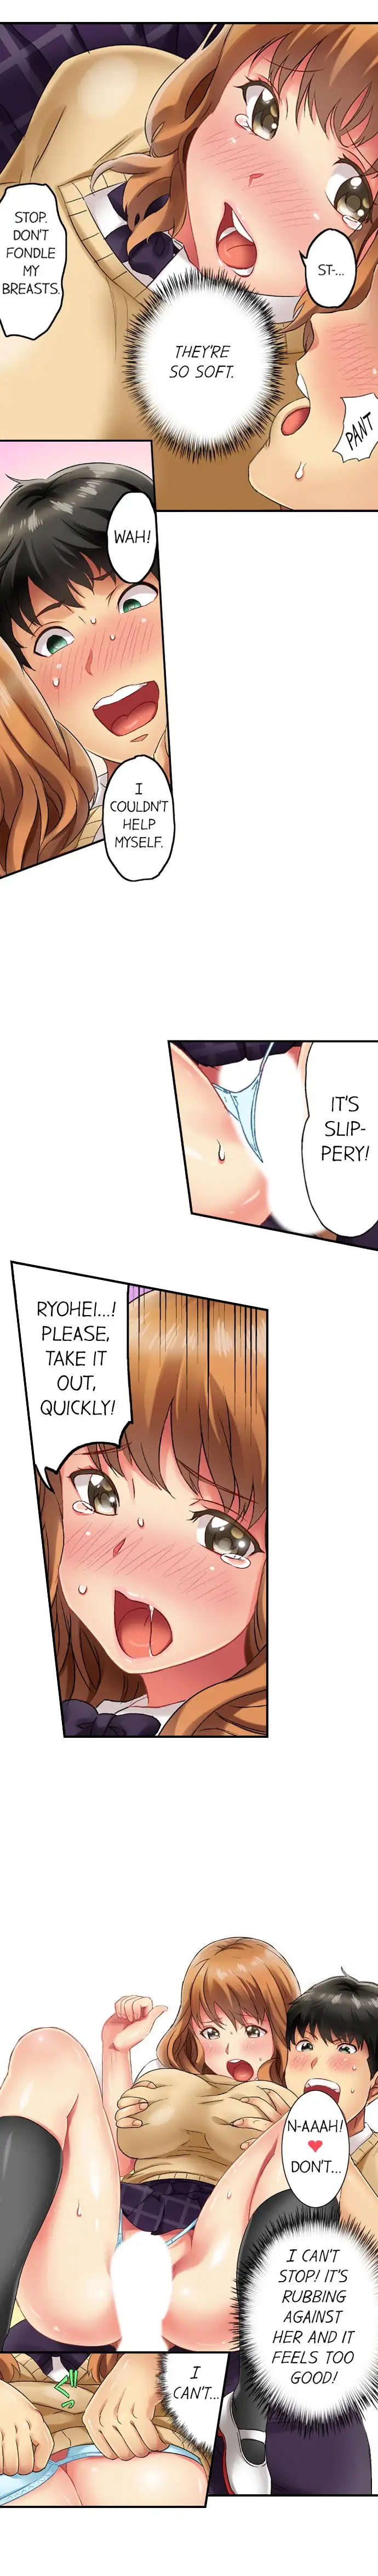 Seeing Her Panties Lets Me Stick In - Chapter 2 Page 4